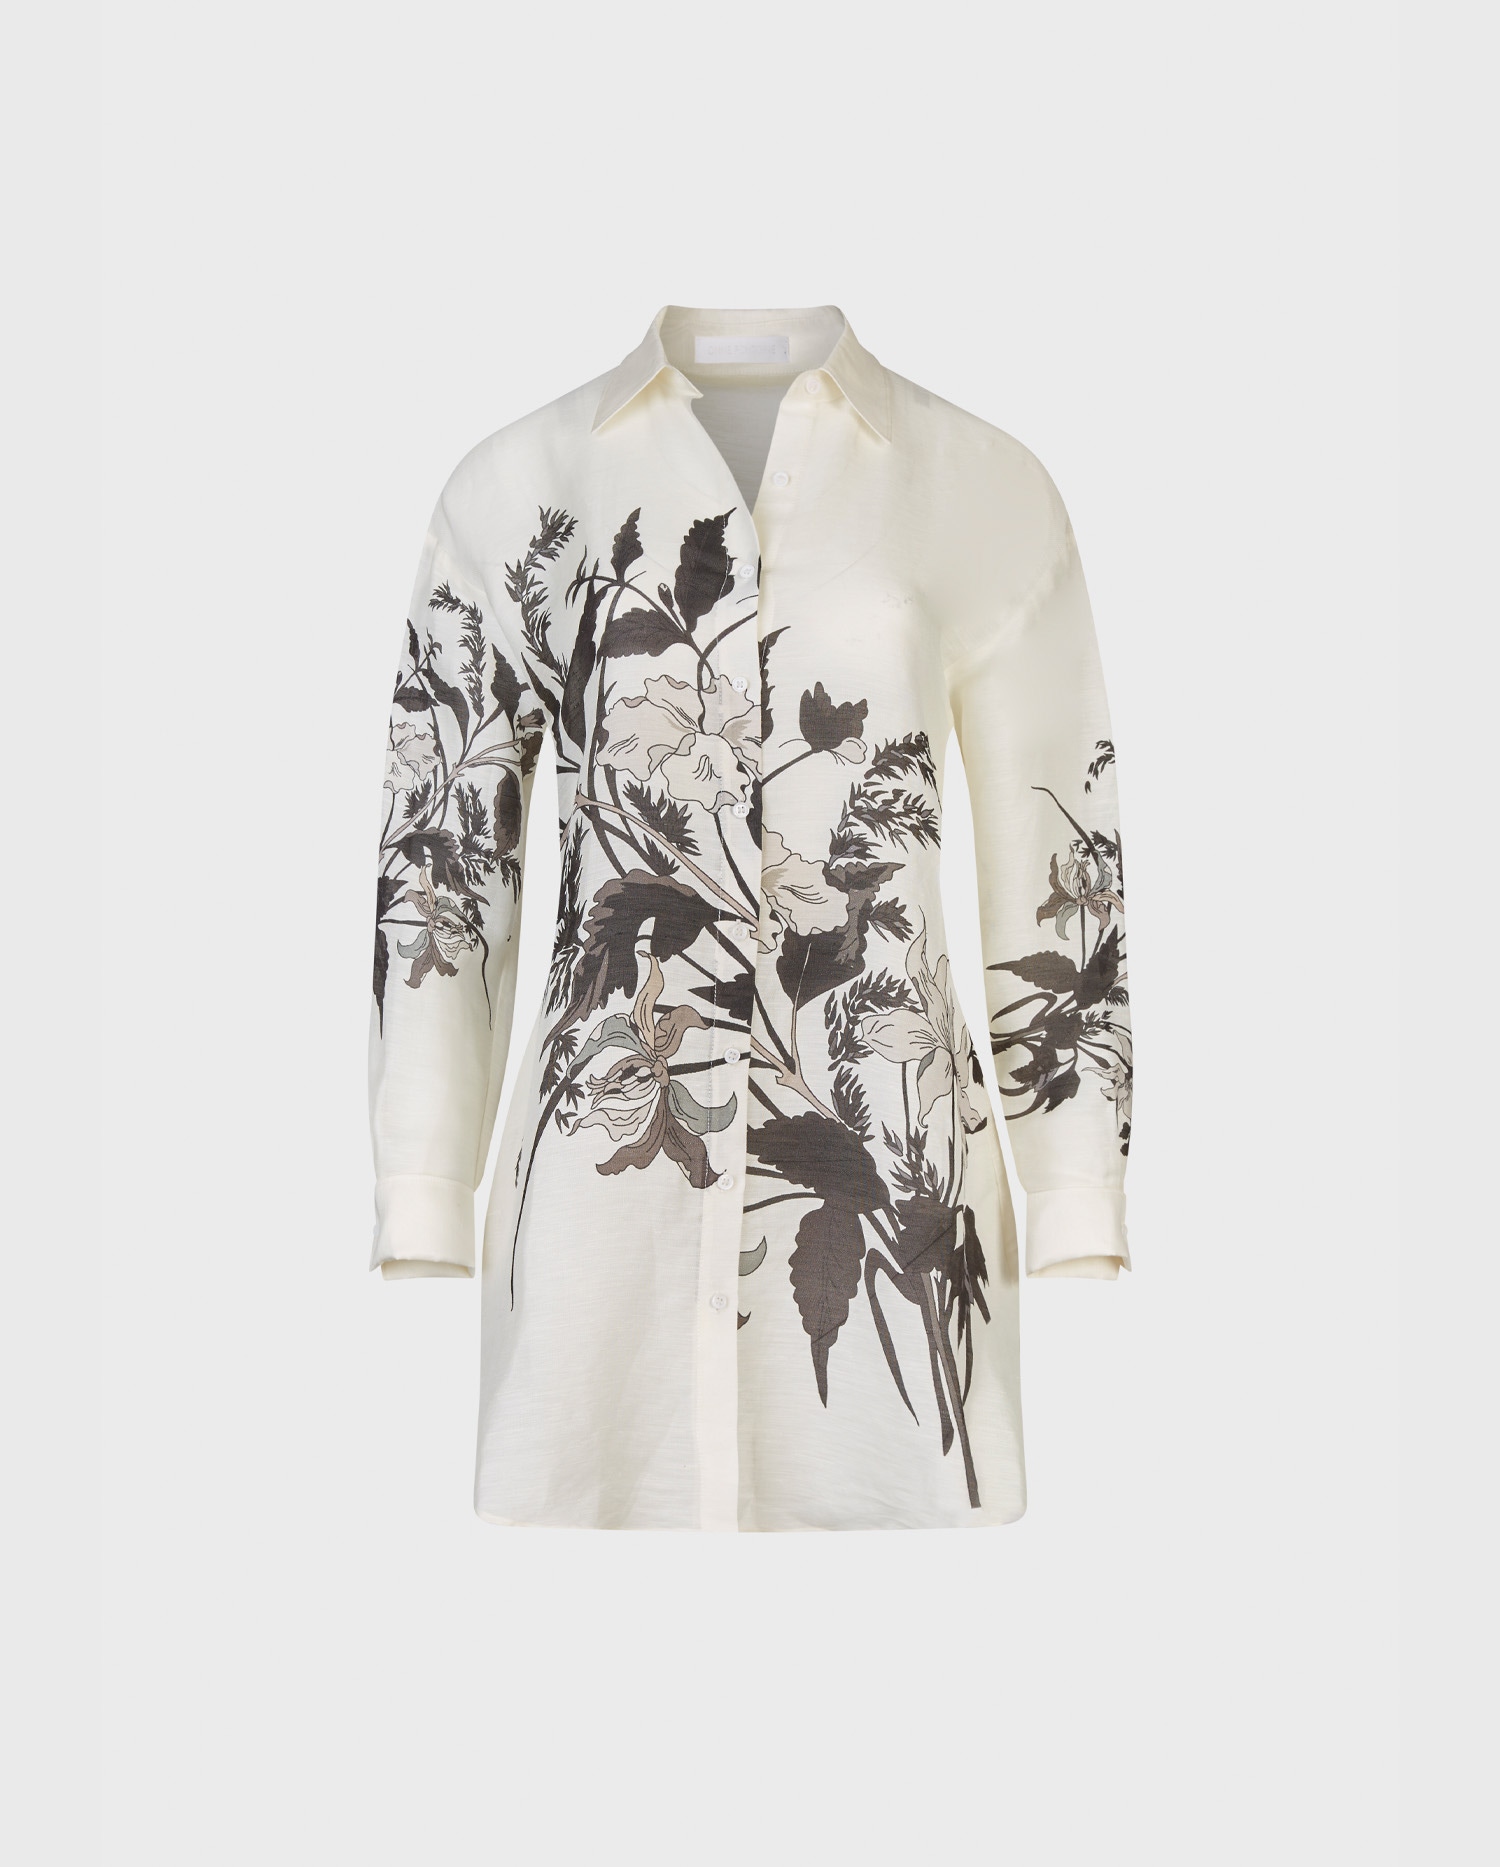 Explore the new FELISA off white long sleeve oversized white shirt with black floral design